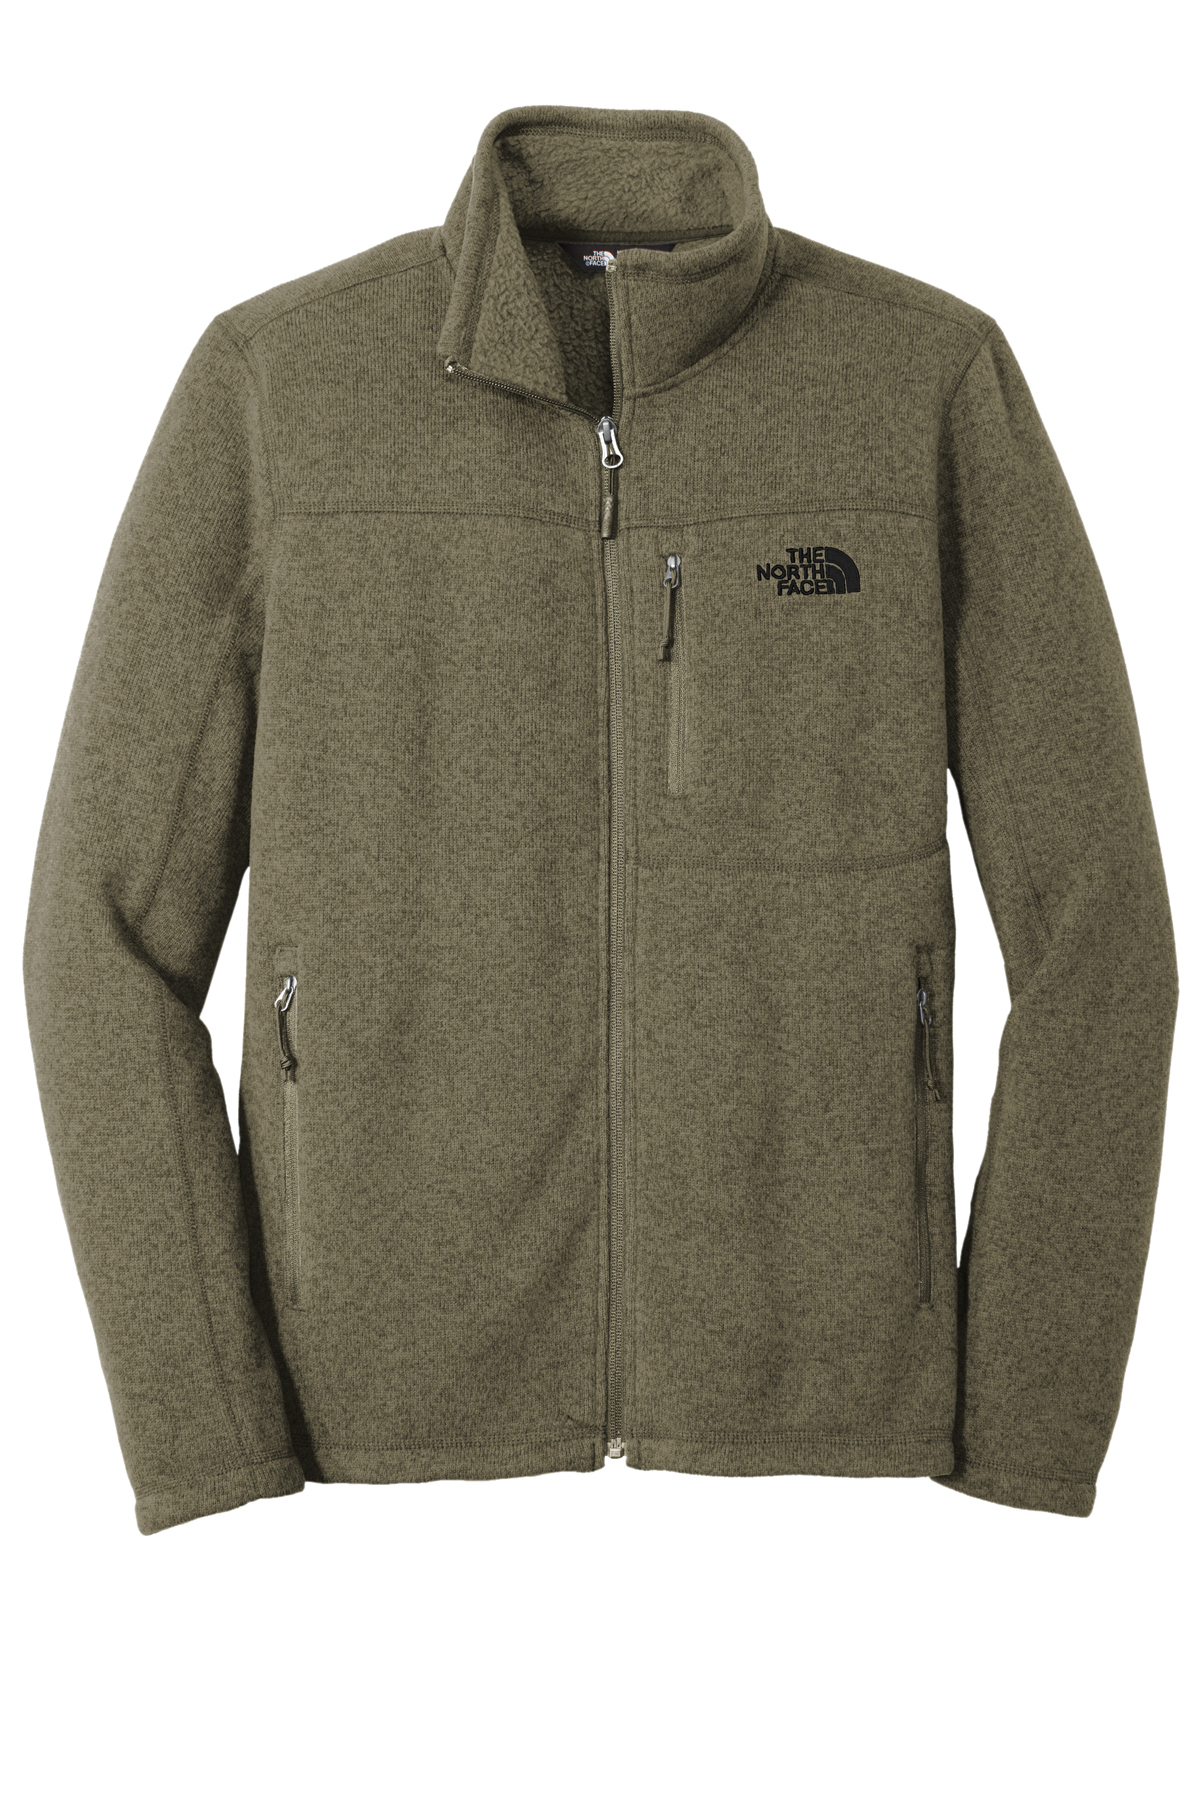 The North Face® Sweater Fleece Jacket | Corporate Jackets | Outerwear ...